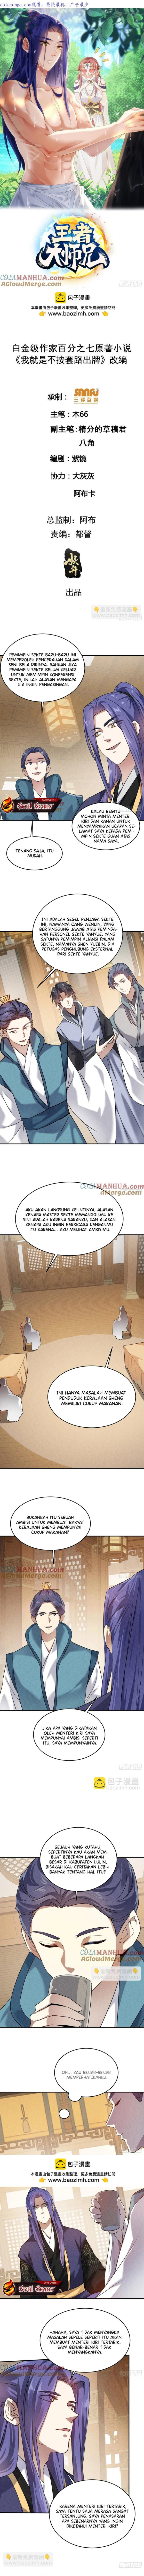 Dilarang COPAS - situs resmi www.mangacanblog.com - Komik i just dont play the card according to the routine 205 - chapter 205 206 Indonesia i just dont play the card according to the routine 205 - chapter 205 Terbaru 1|Baca Manga Komik Indonesia|Mangacan